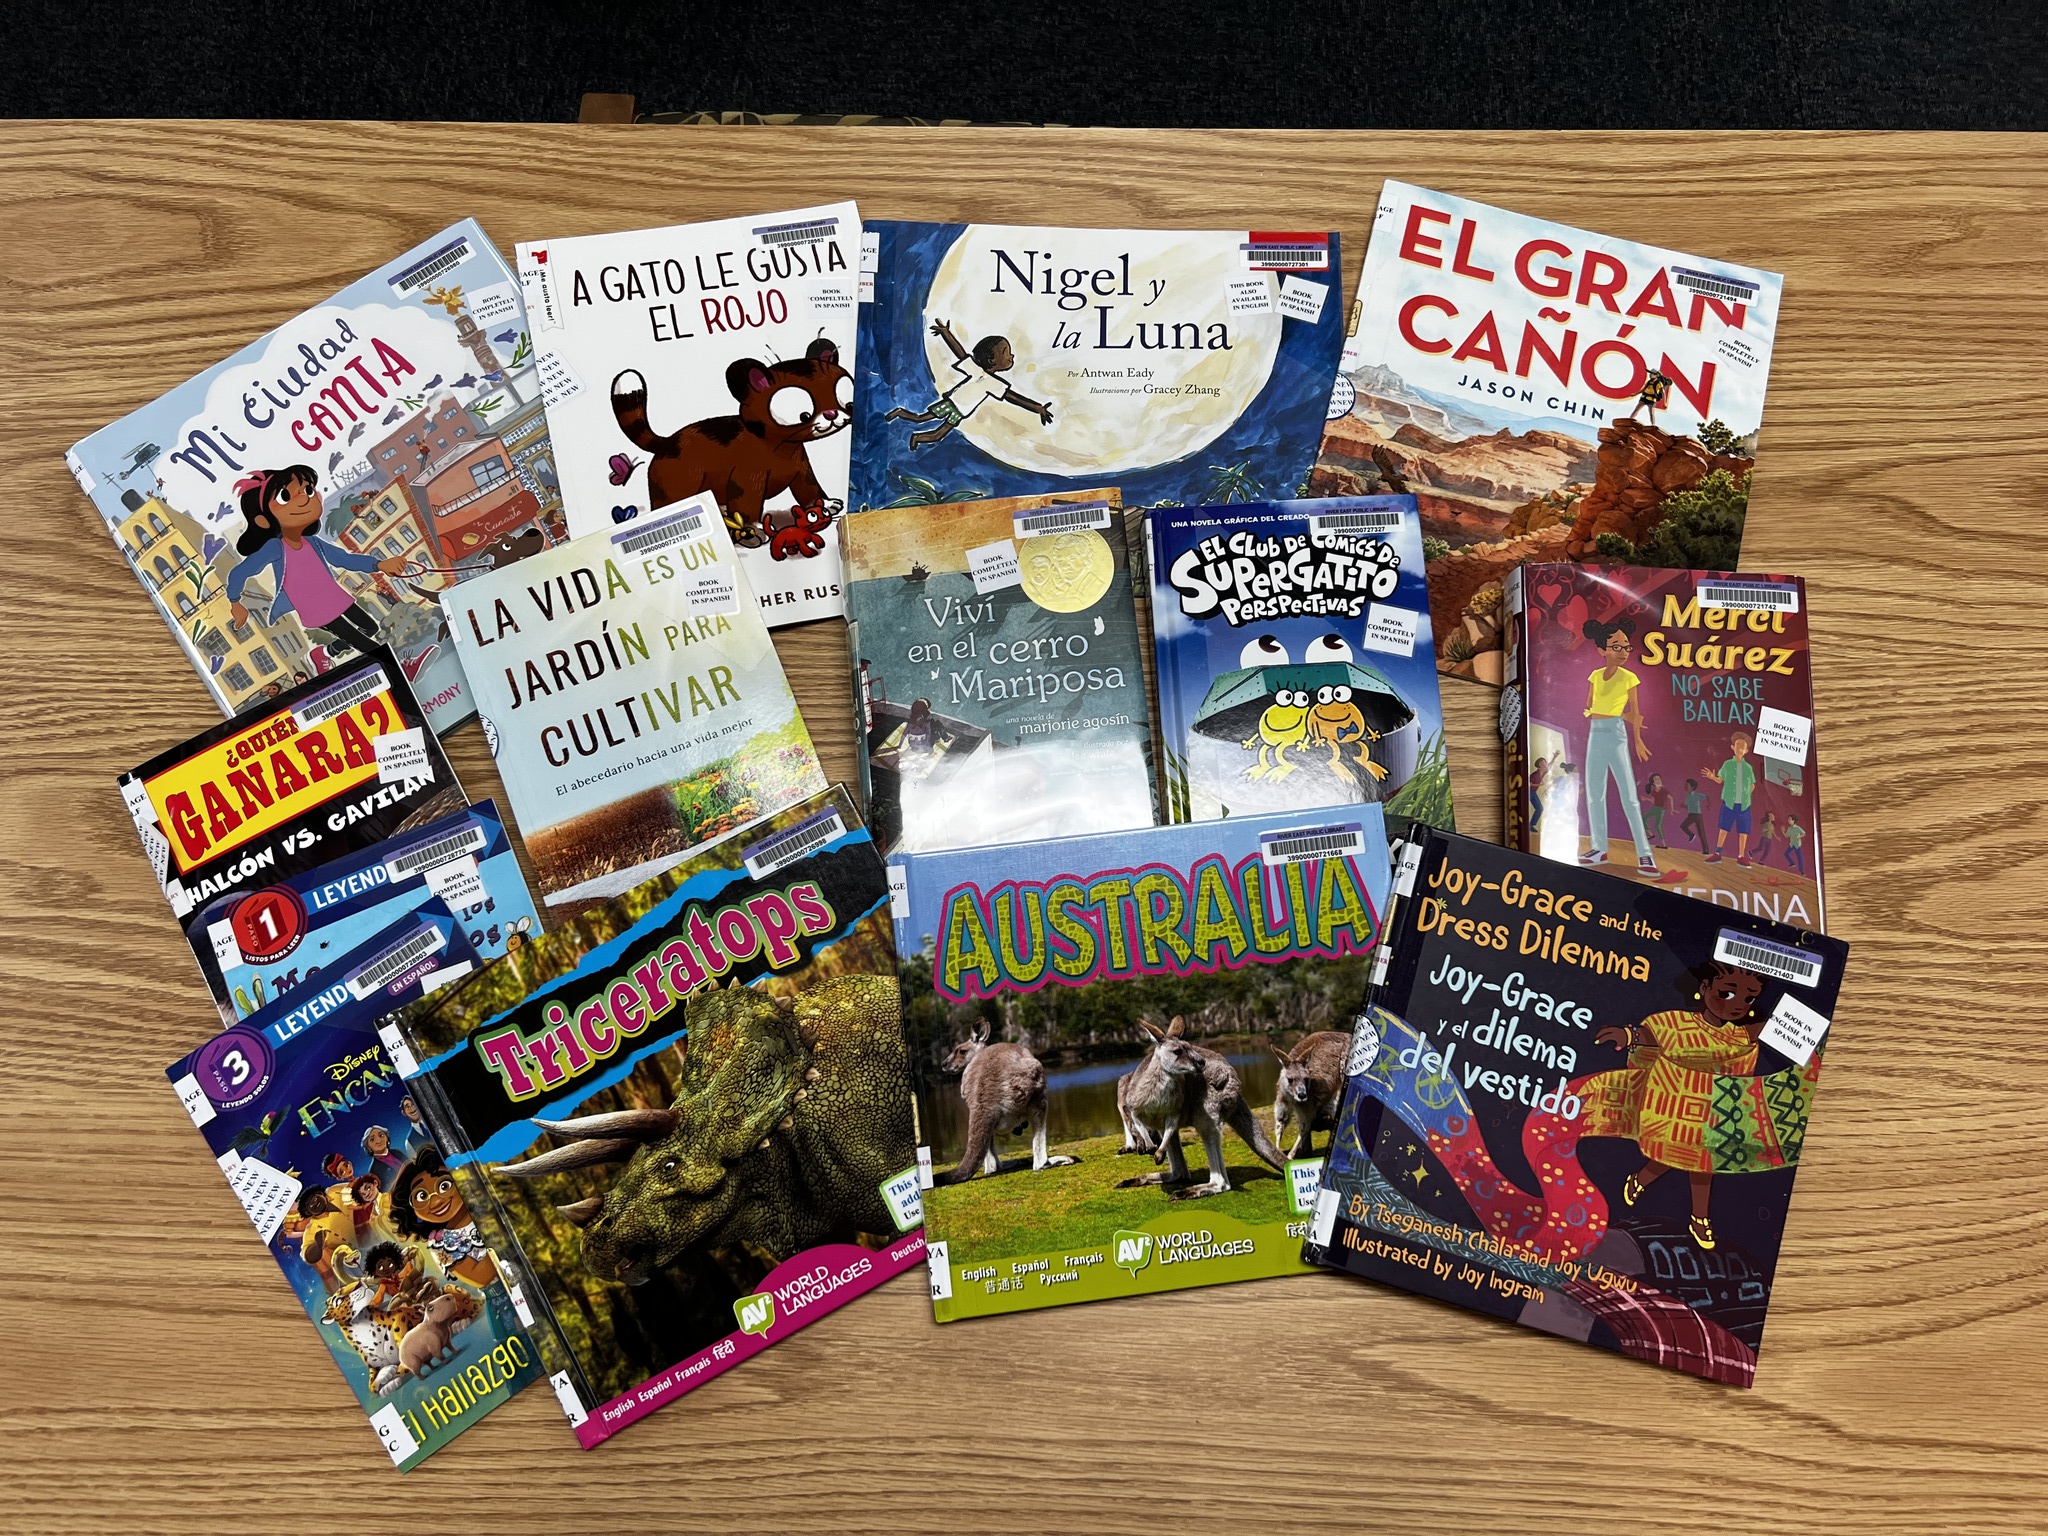 Image showing a selection of our library's new Spanish language books